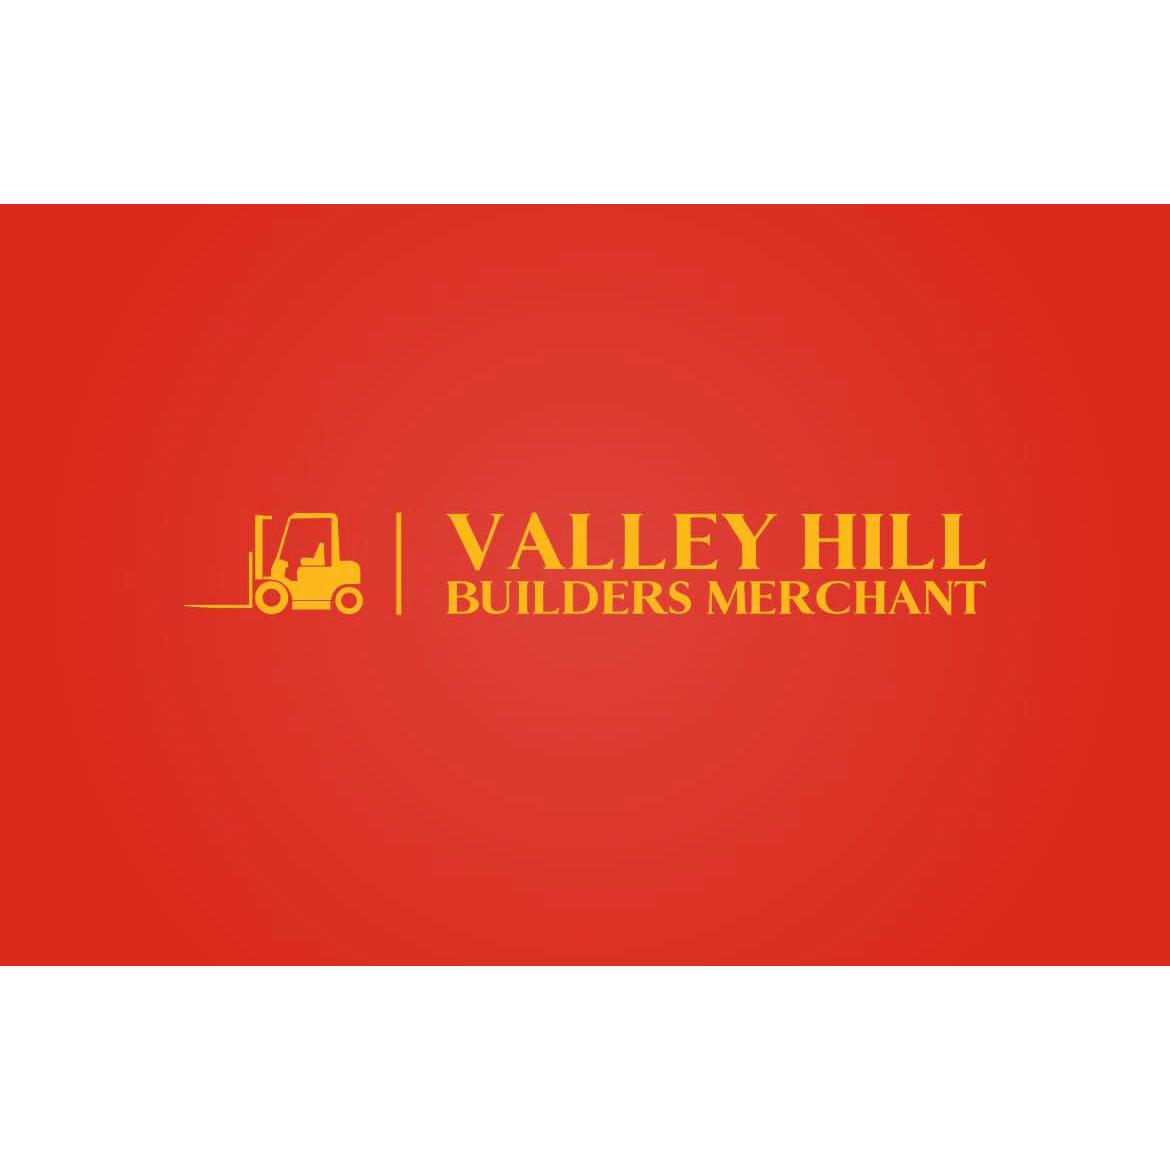 Valley Hill Builders Merchant - Loughton, Essex IG10 3AA - 020 8508 3168 | ShowMeLocal.com